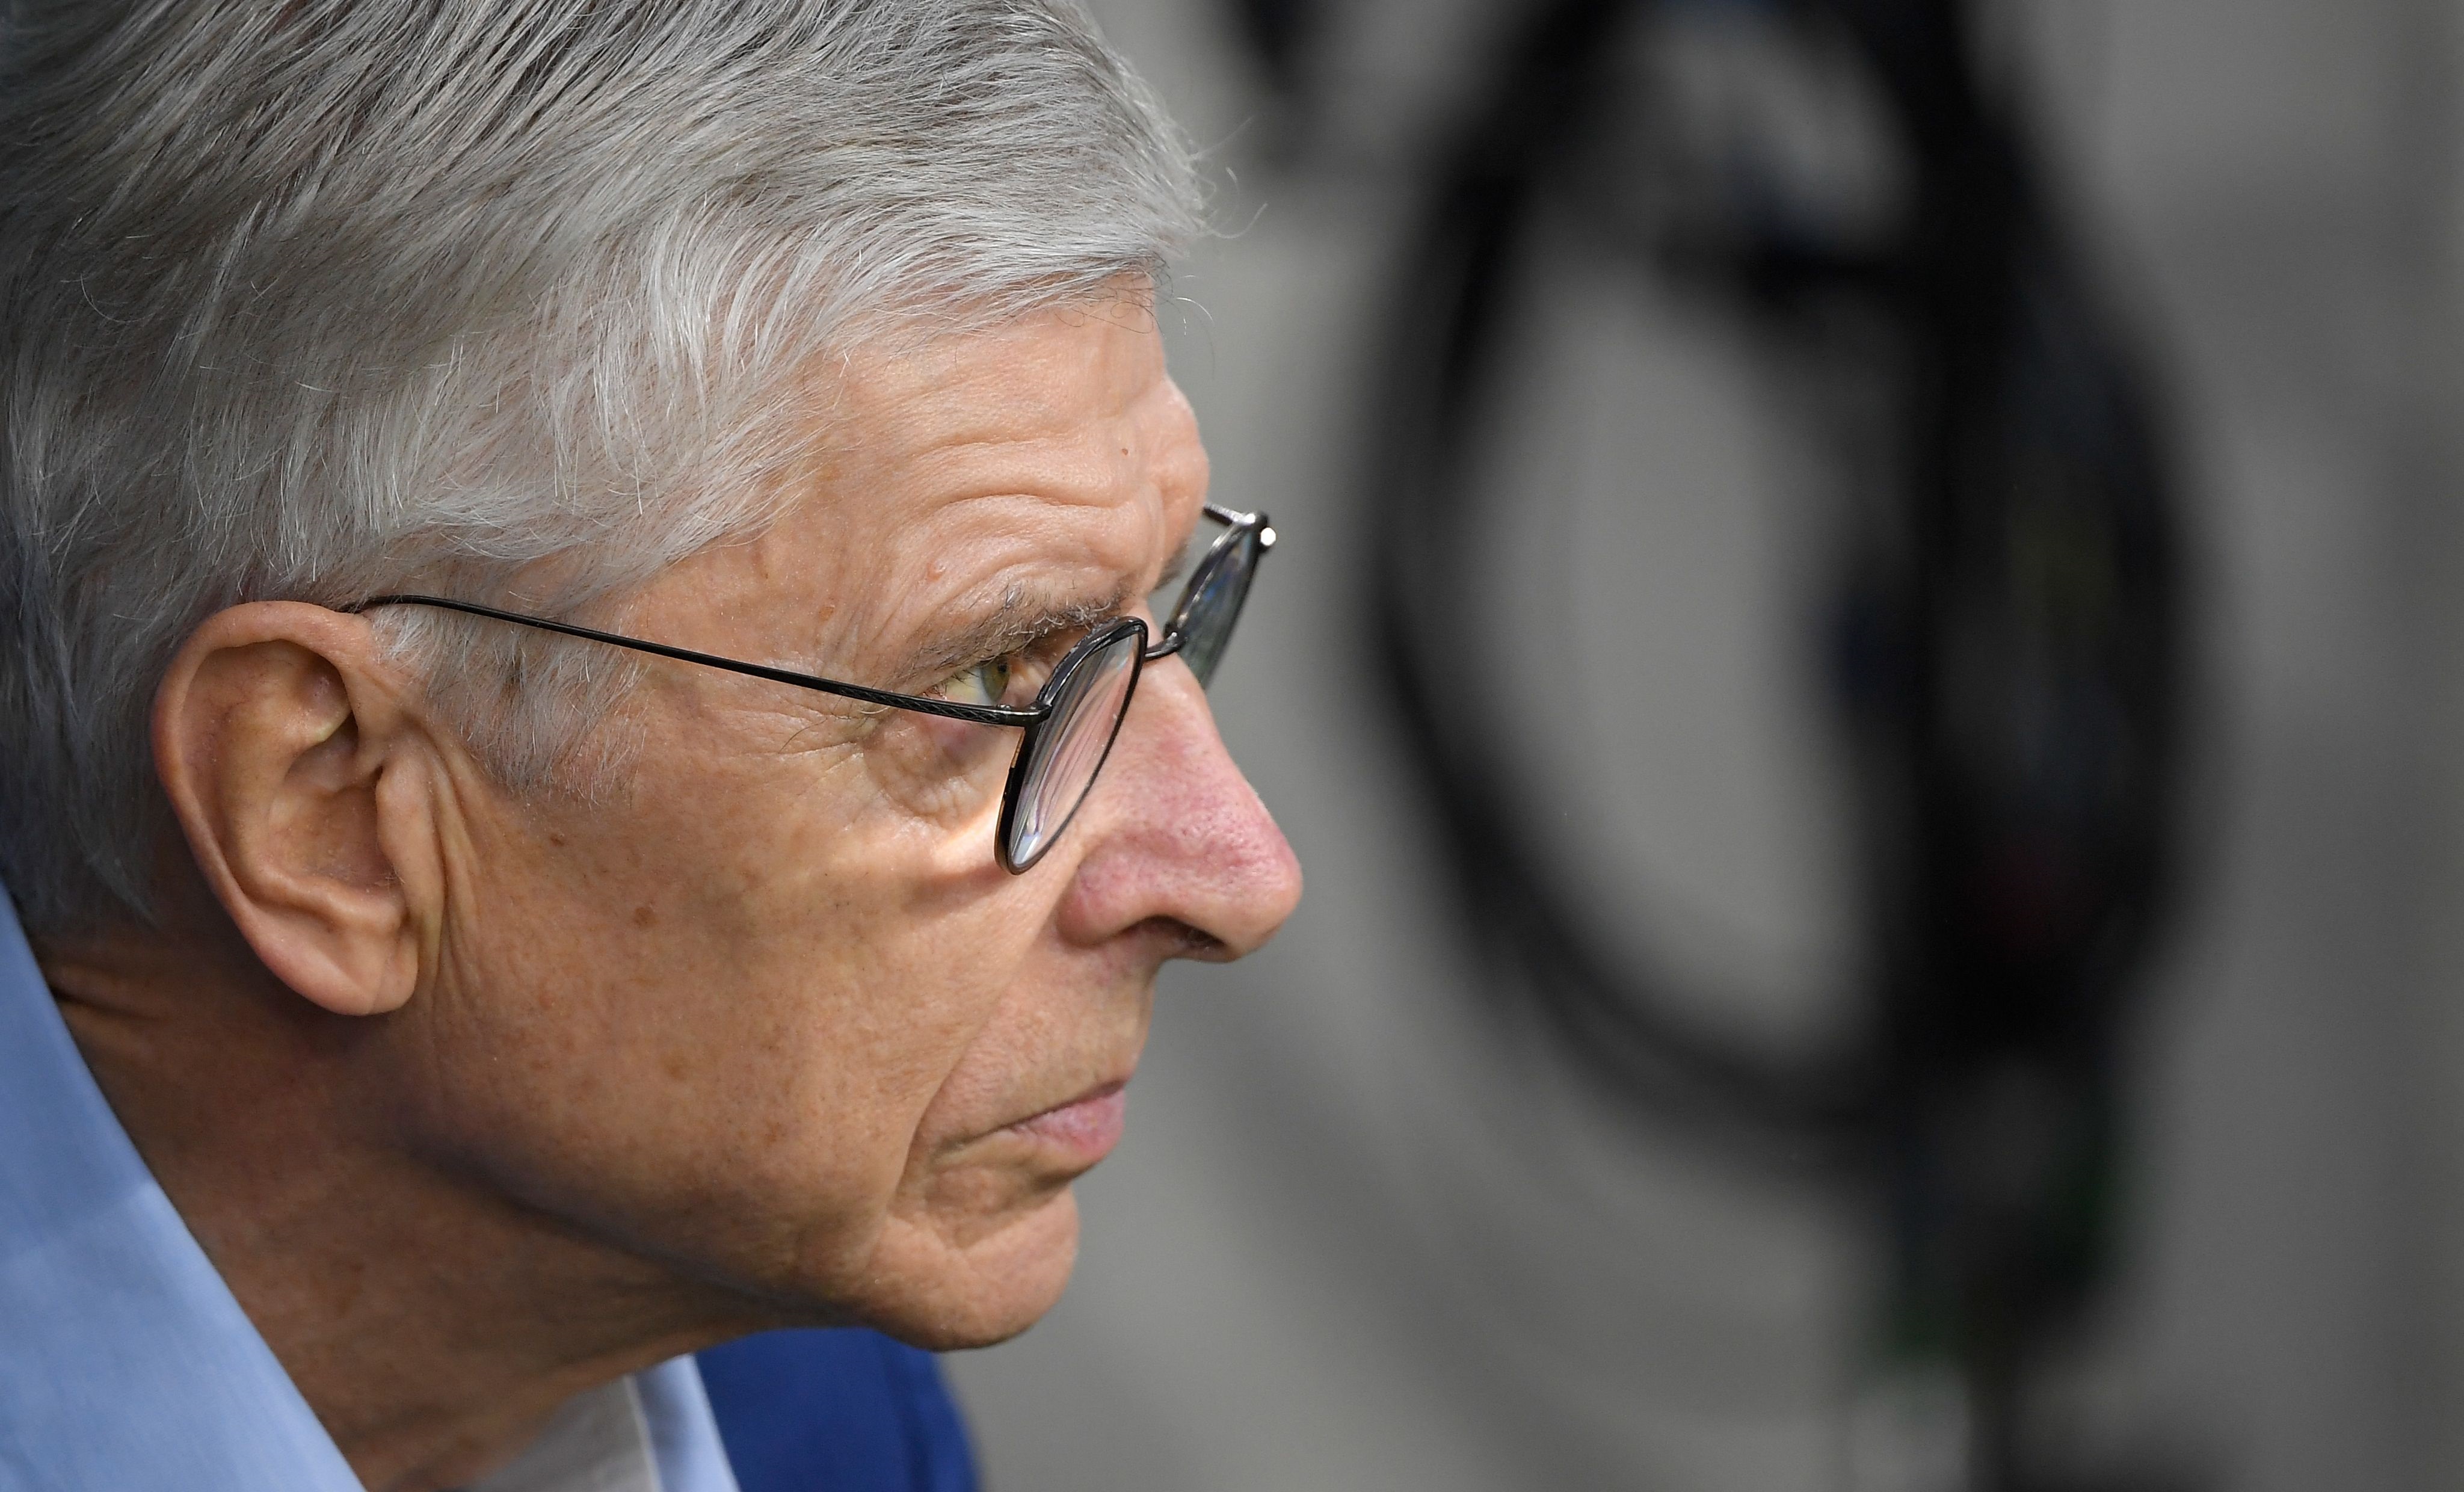 ‘He was cheating’ – Arsene Wenger slams Liverpool star after involvement in controversial Inter moment